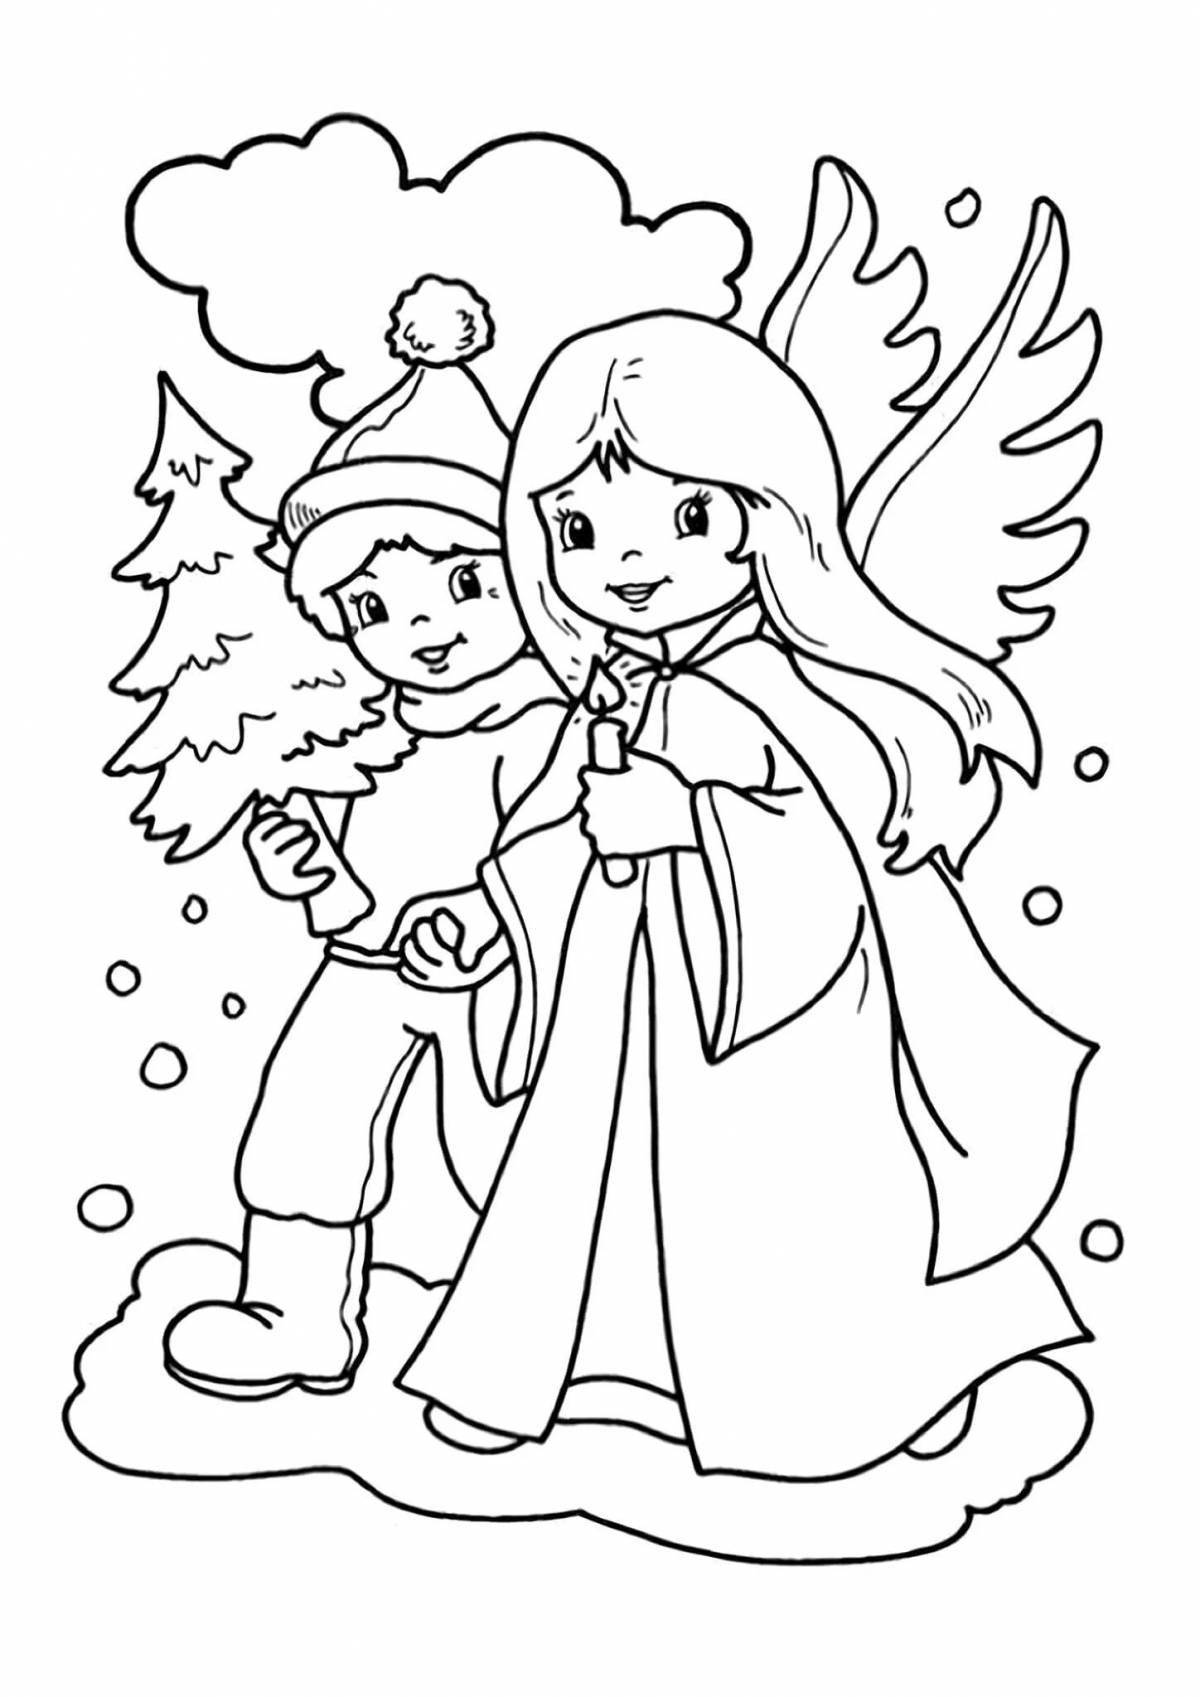 Exquisite Christmas story coloring book